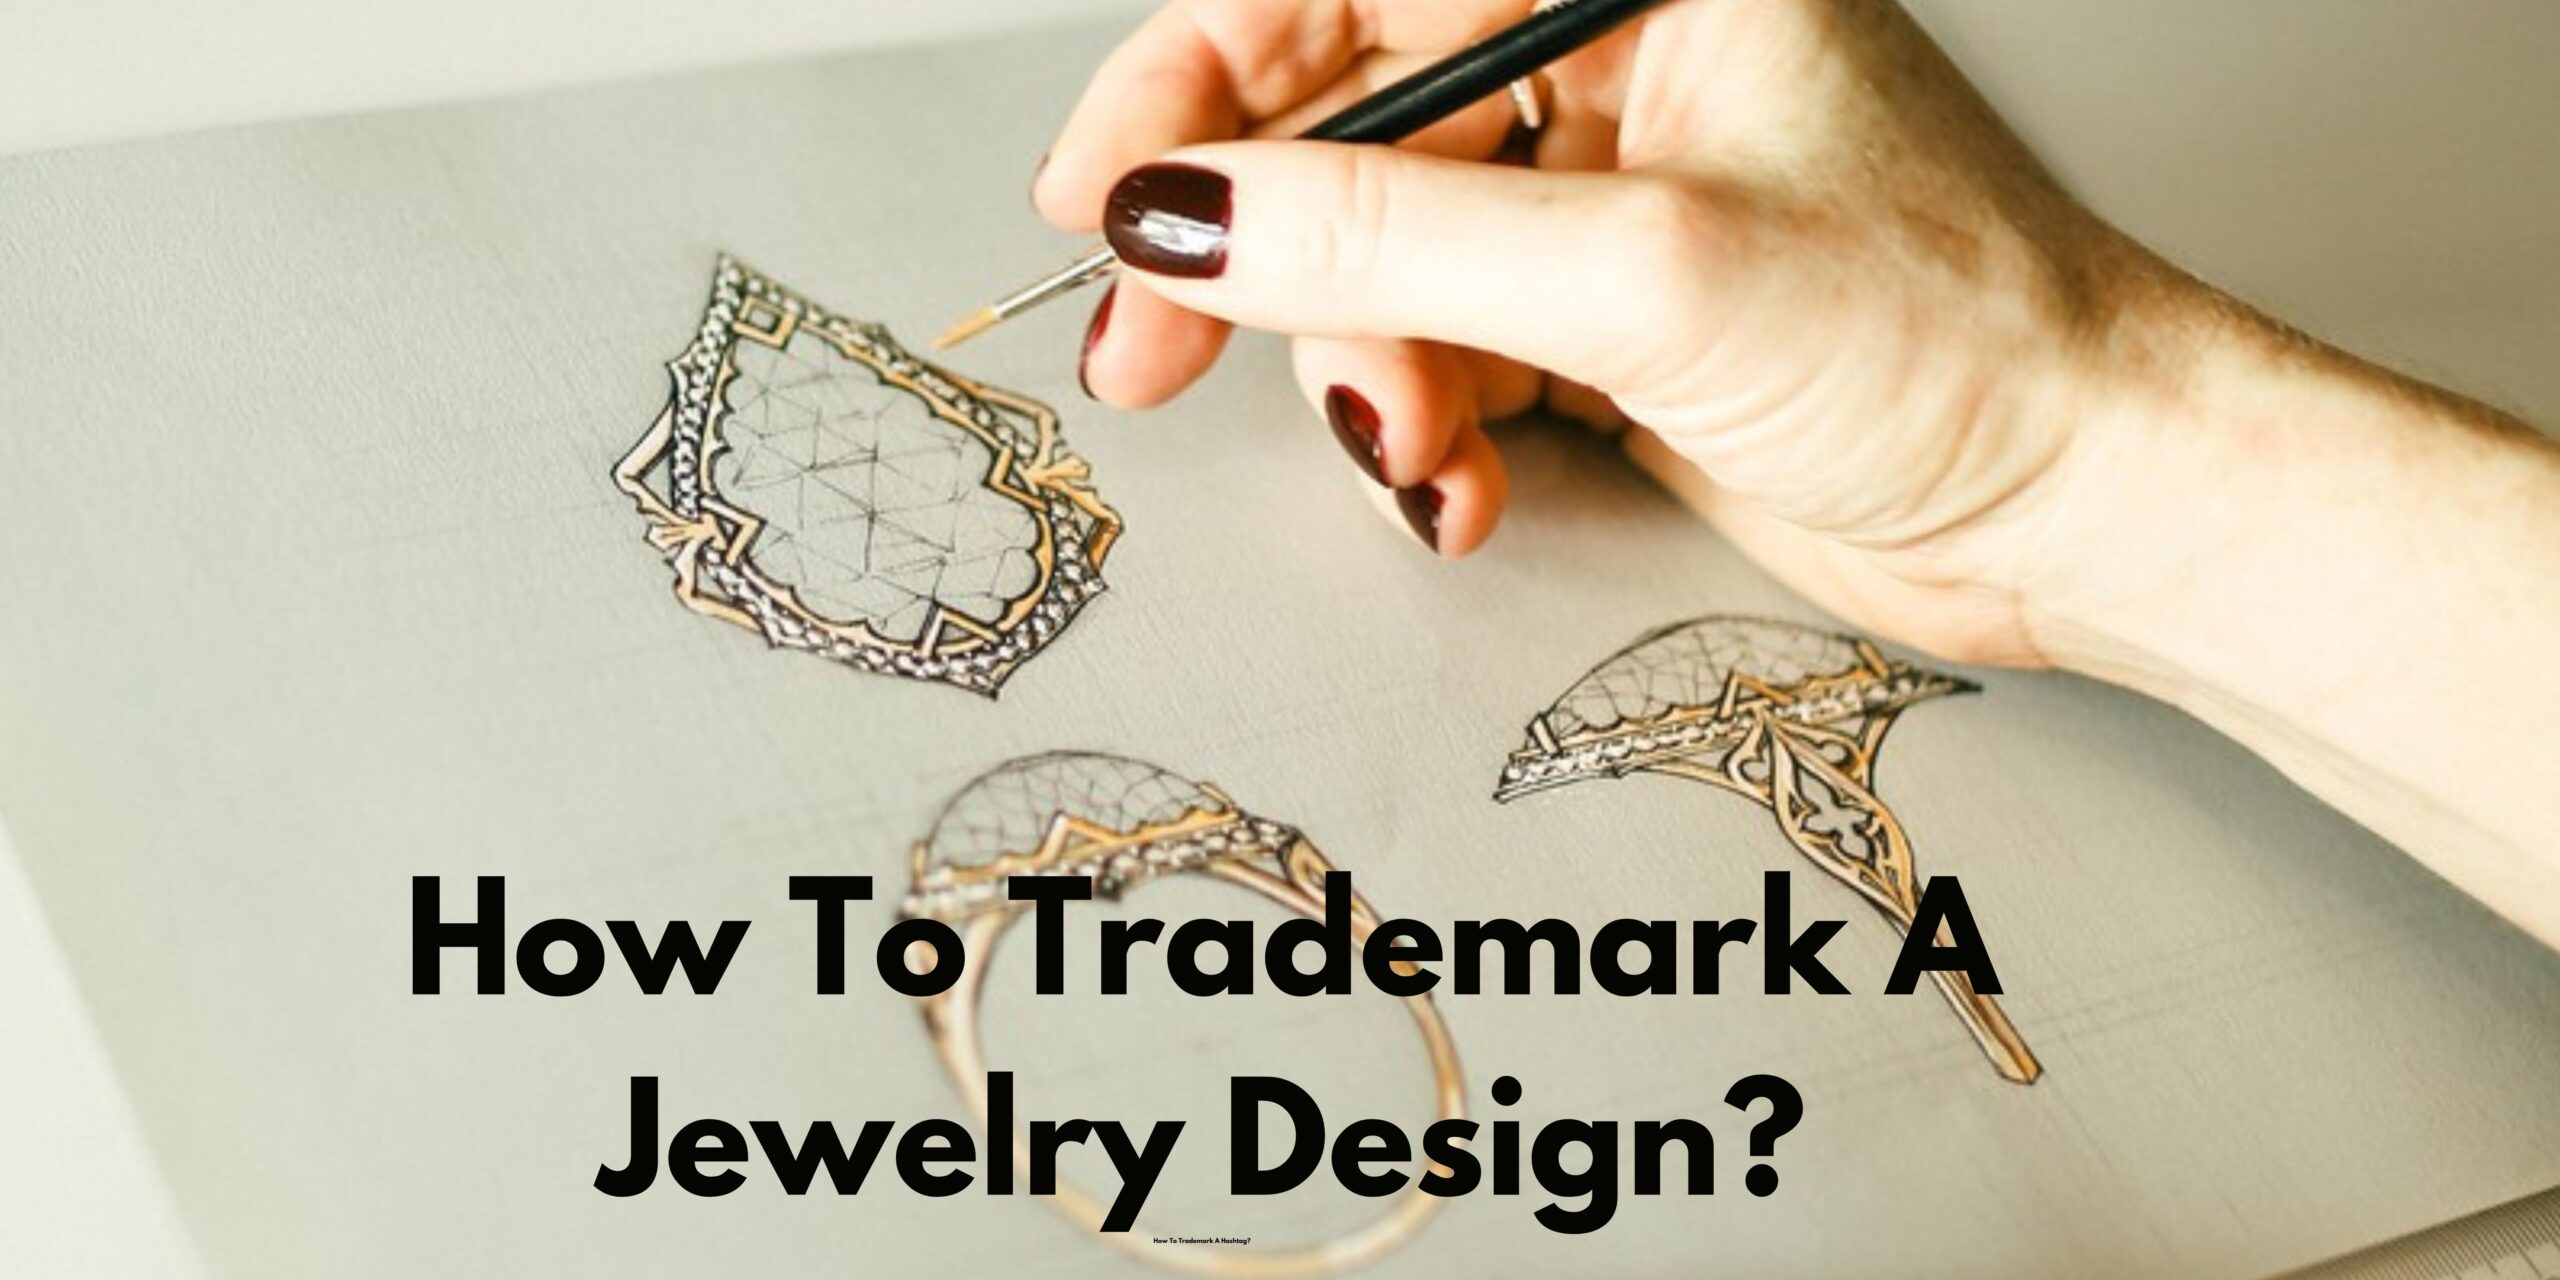 How To Trademark A Jewelry Design?